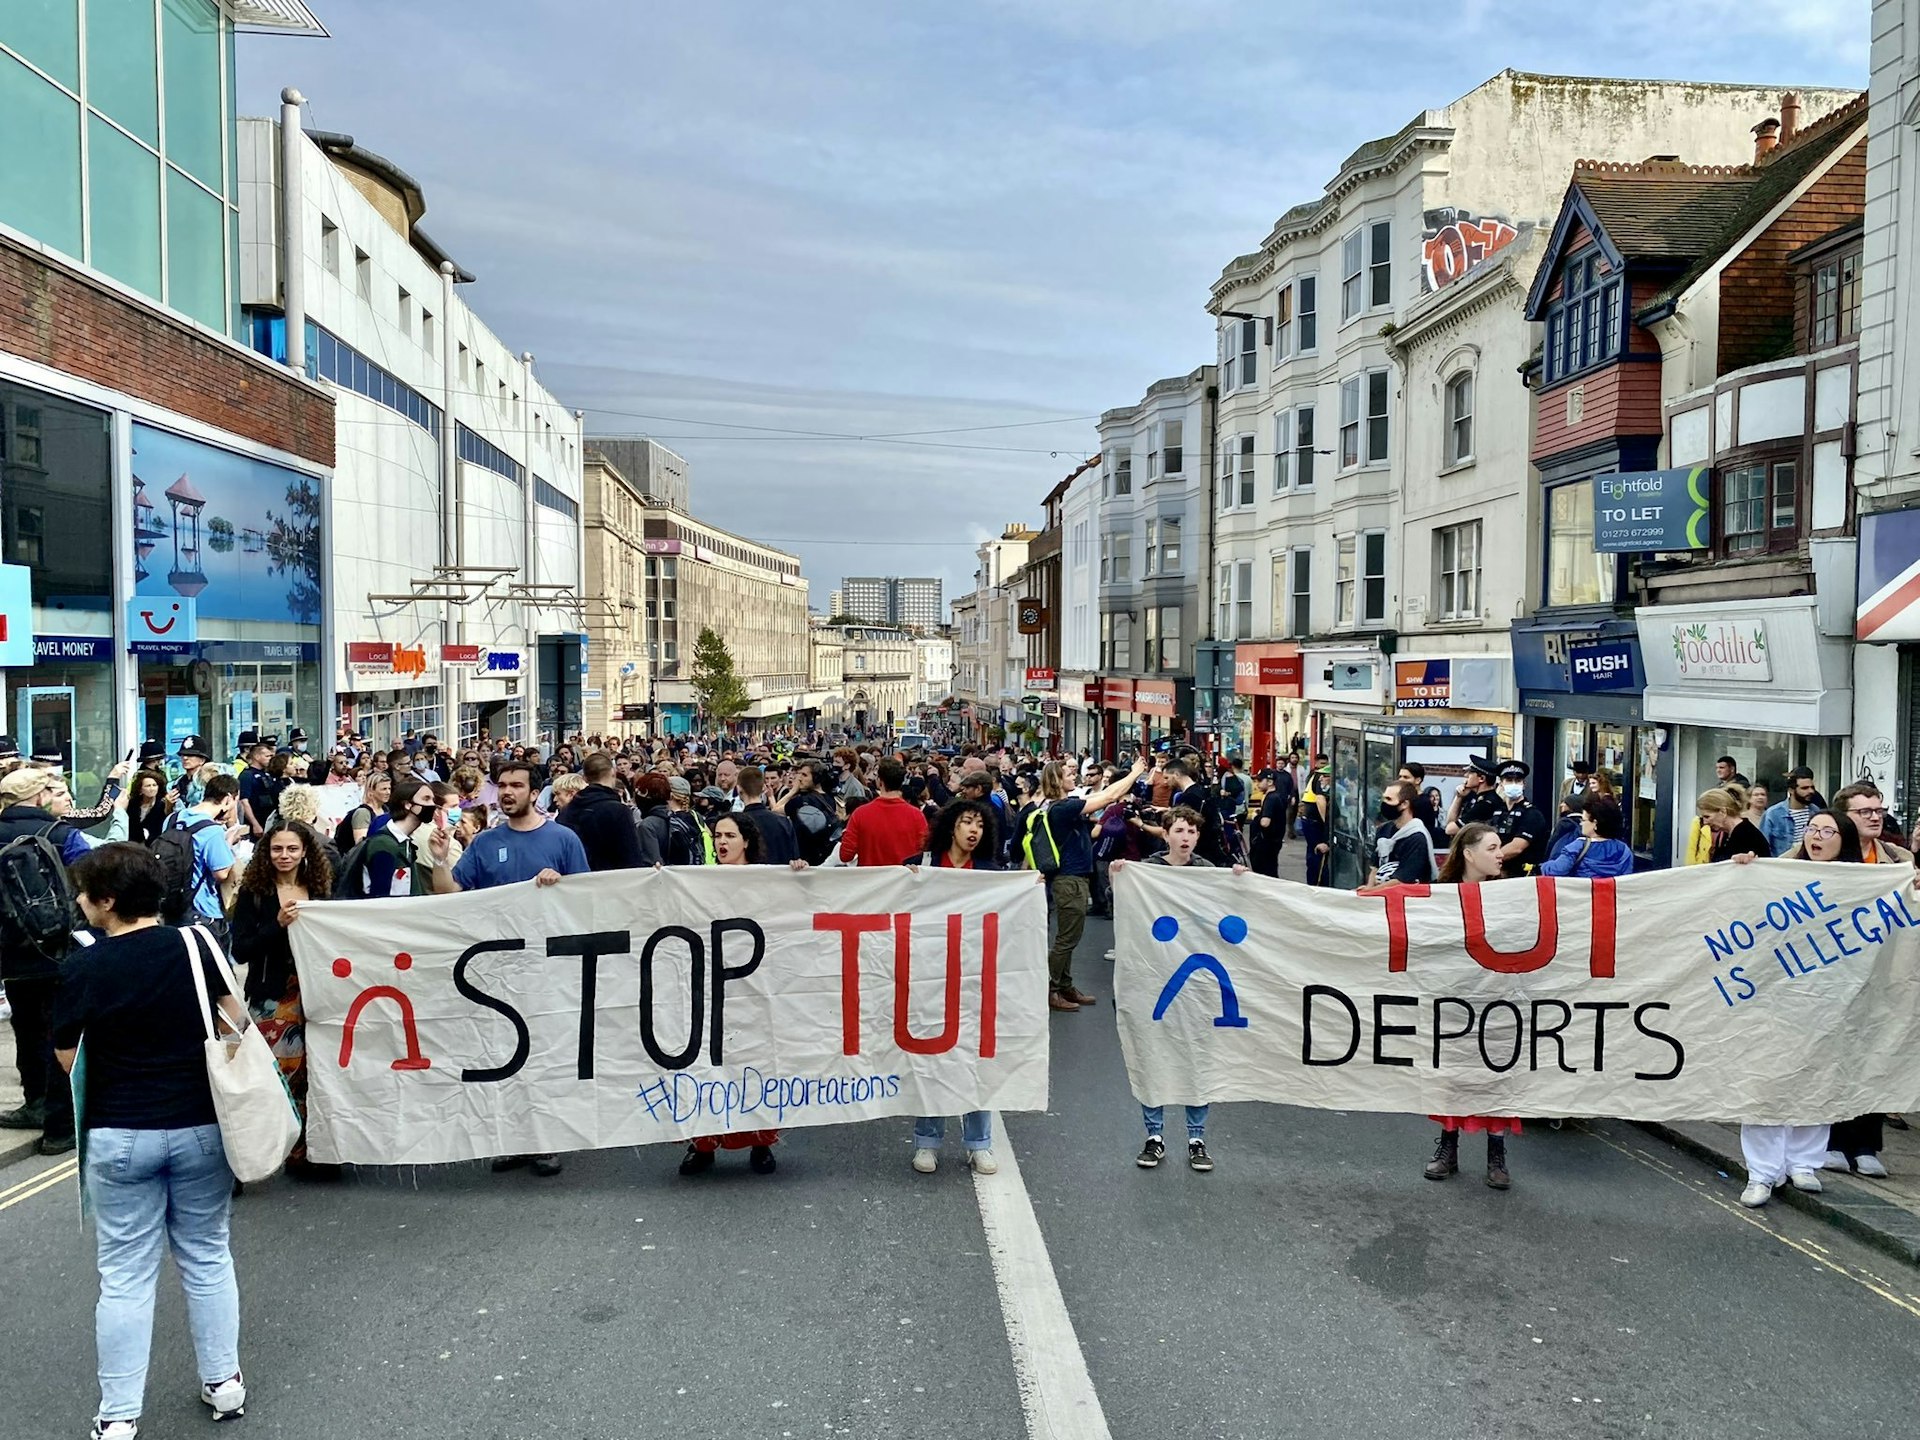 The activists who stopped Tui’s deportation flights